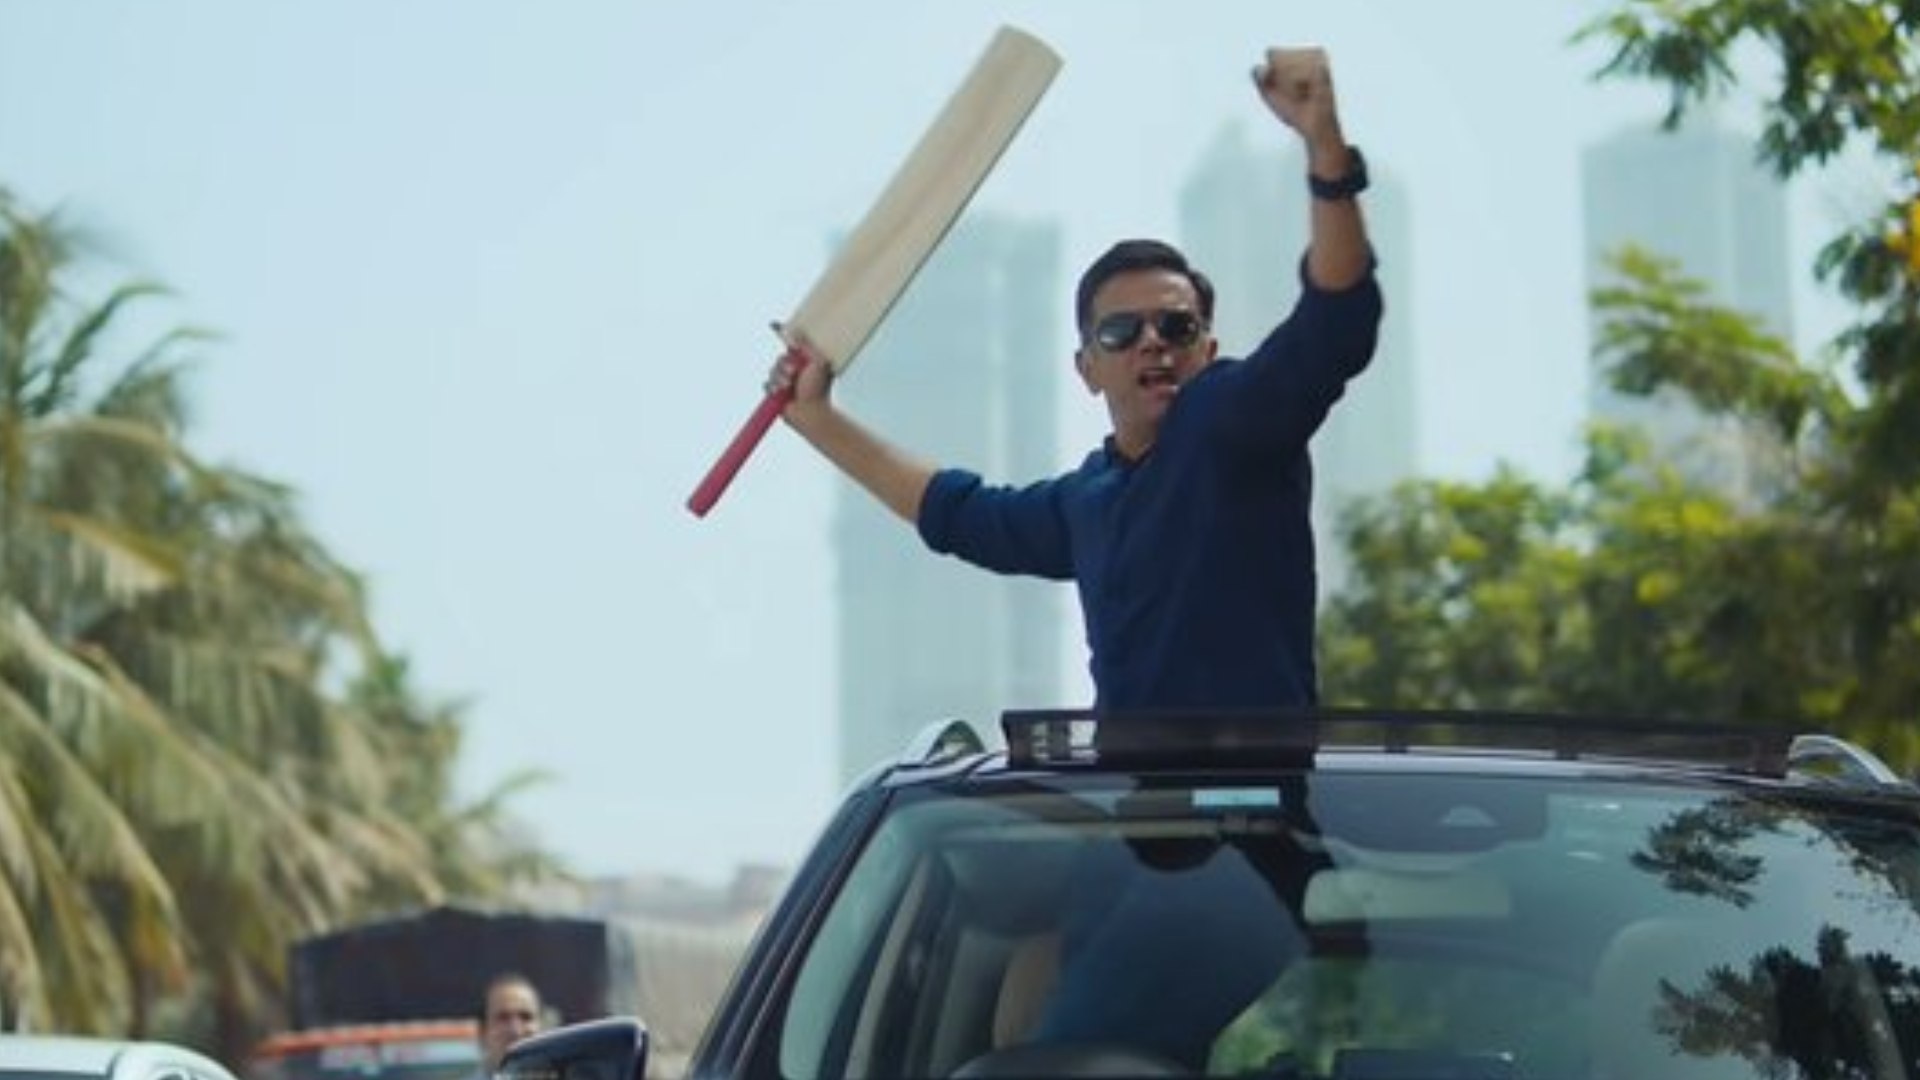 Rahul Dravid's angry avatar in an advertisement has sent social media into a tizzy, with many fans expressing shock at this side of The Wall in a funny way.